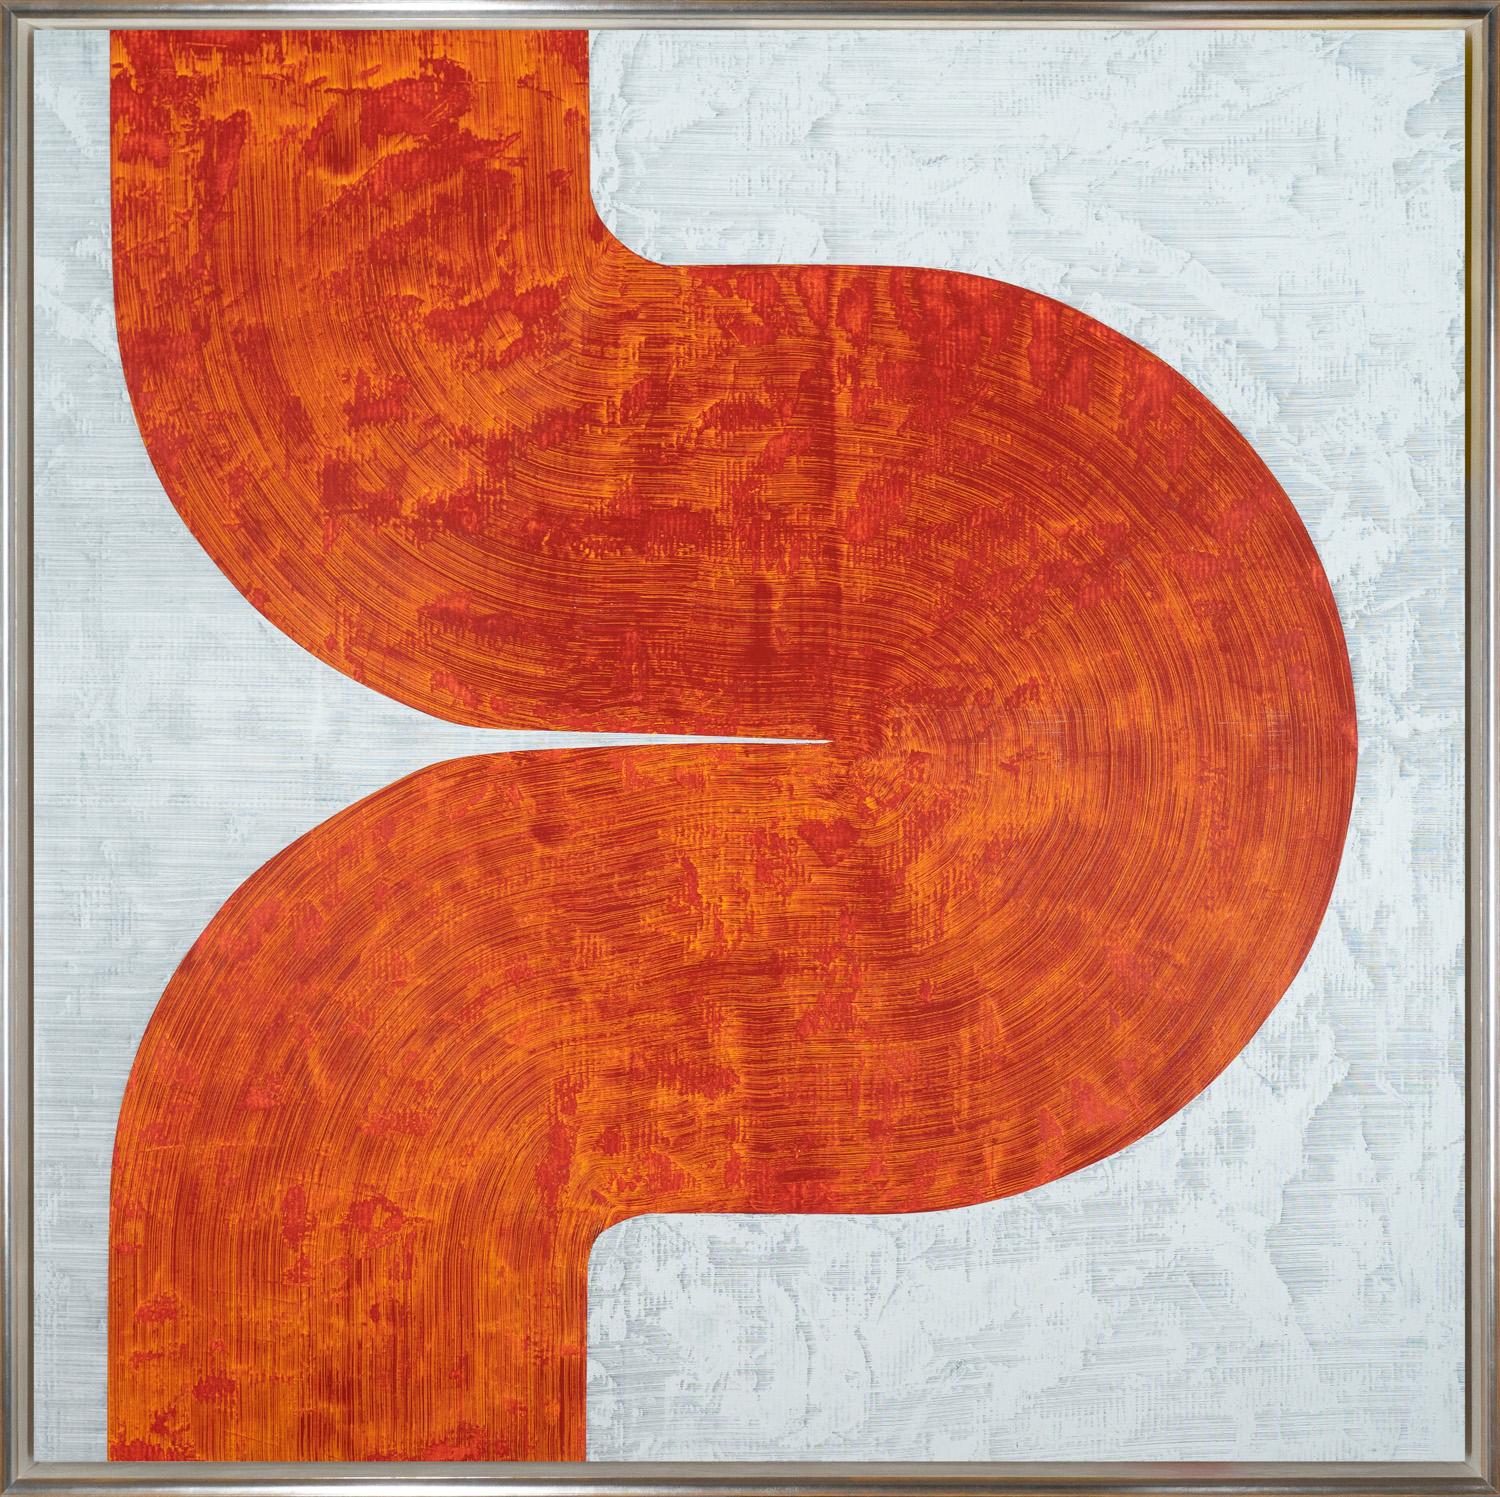 "Harmonia 15-3" is a framed acrylic painting on canvas by David Skillicorn, with large abstract organic orange form in a White and Gray background.

 This piece is finished in a silver scoop floater frame with a white-washed woodgrain effect on the